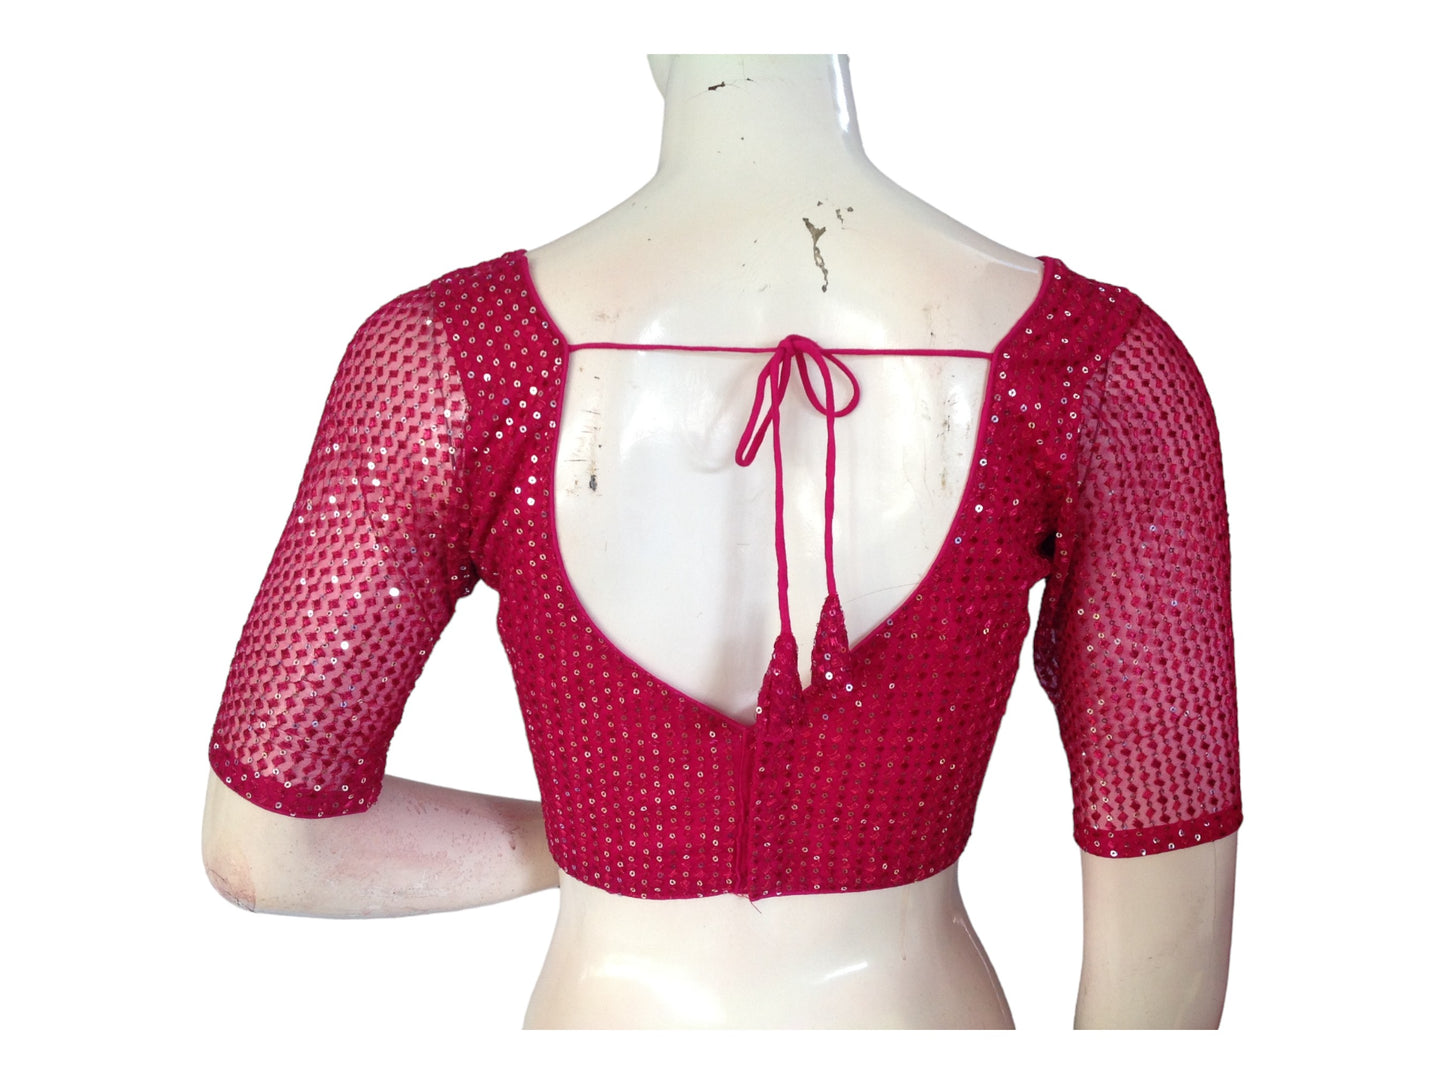 Pink Color Netted Embroidery Sequins Readymade Saree Blouse, Indian Designer Choli top